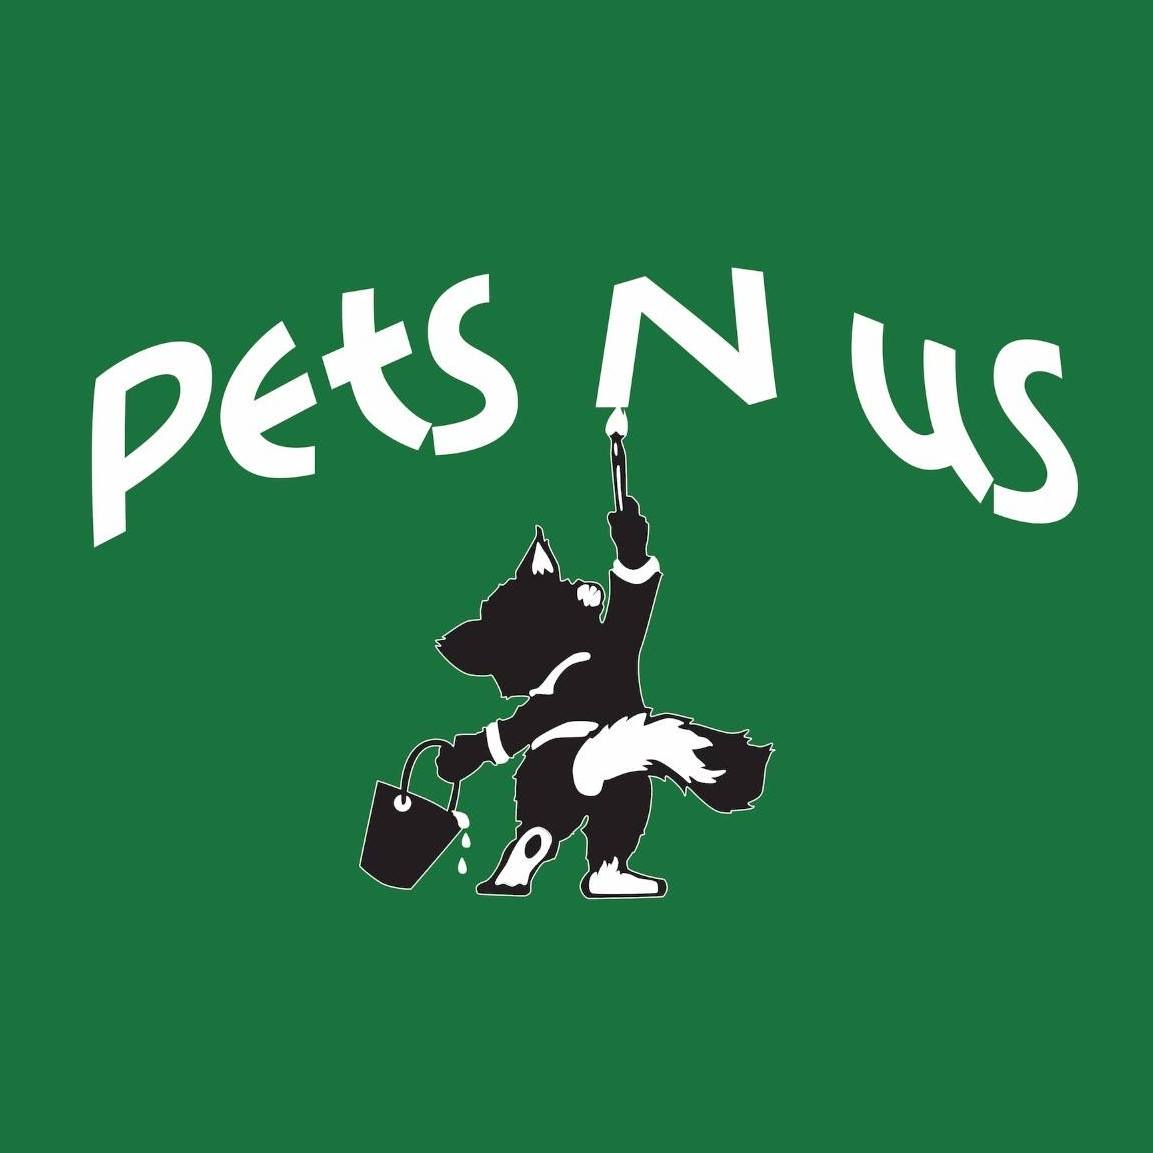 Pets n us logo, event is for dog photos with santa